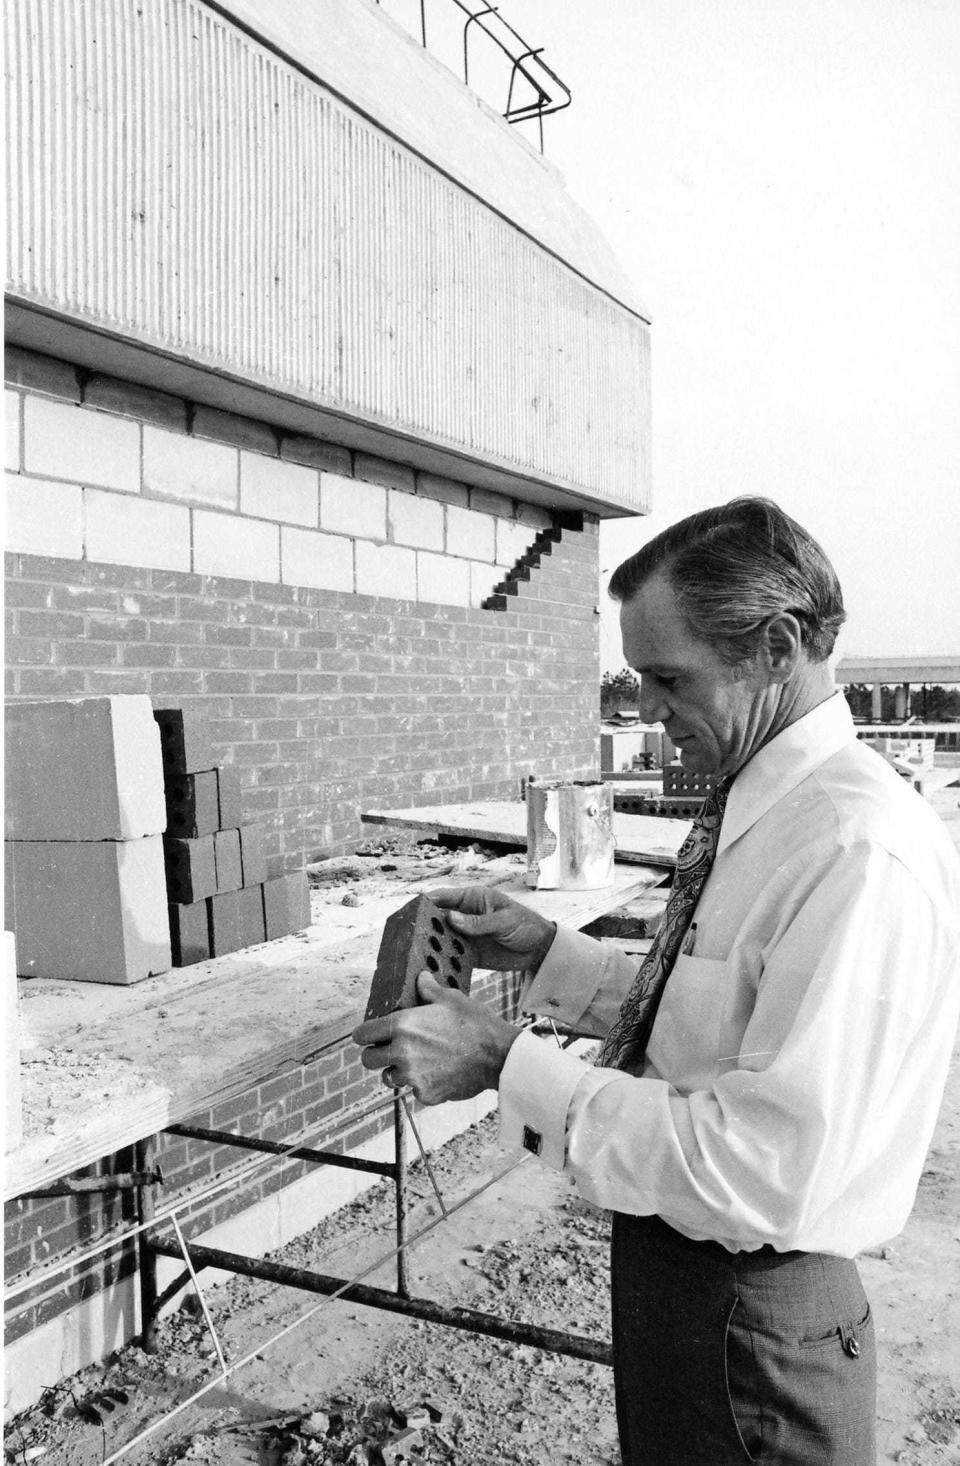 University of North Florida President Thomas G. Carpenter oversees construction of his new campus in 1972.